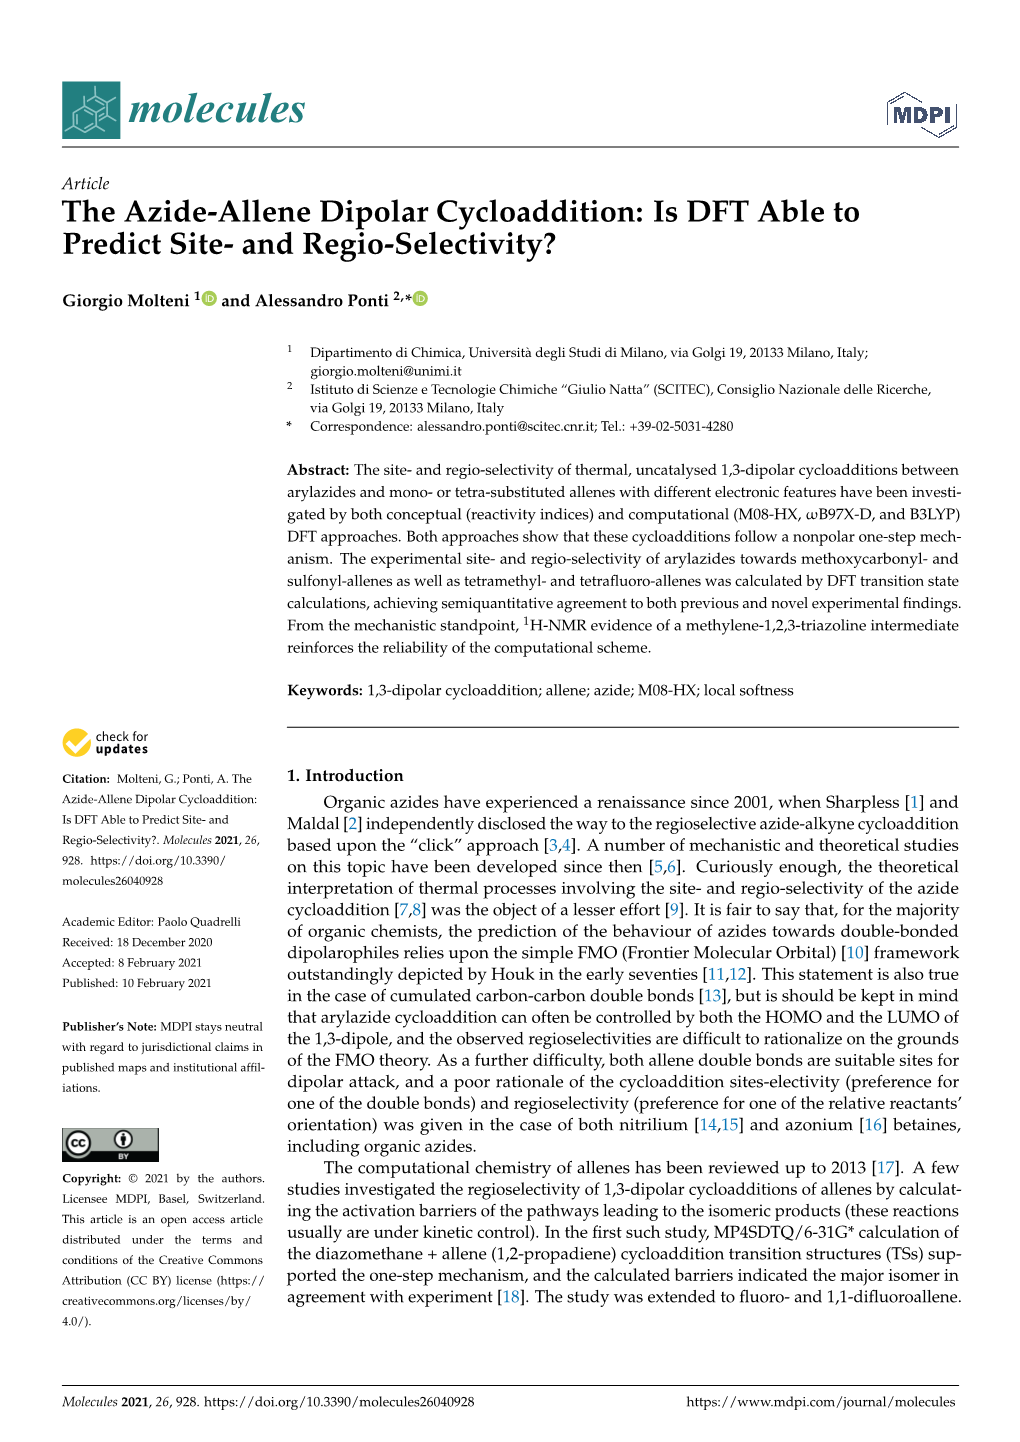 The Azide-Allene Dipolar Cycloaddition: Is DFT Able to Predict Site- and Regio-Selectivity?